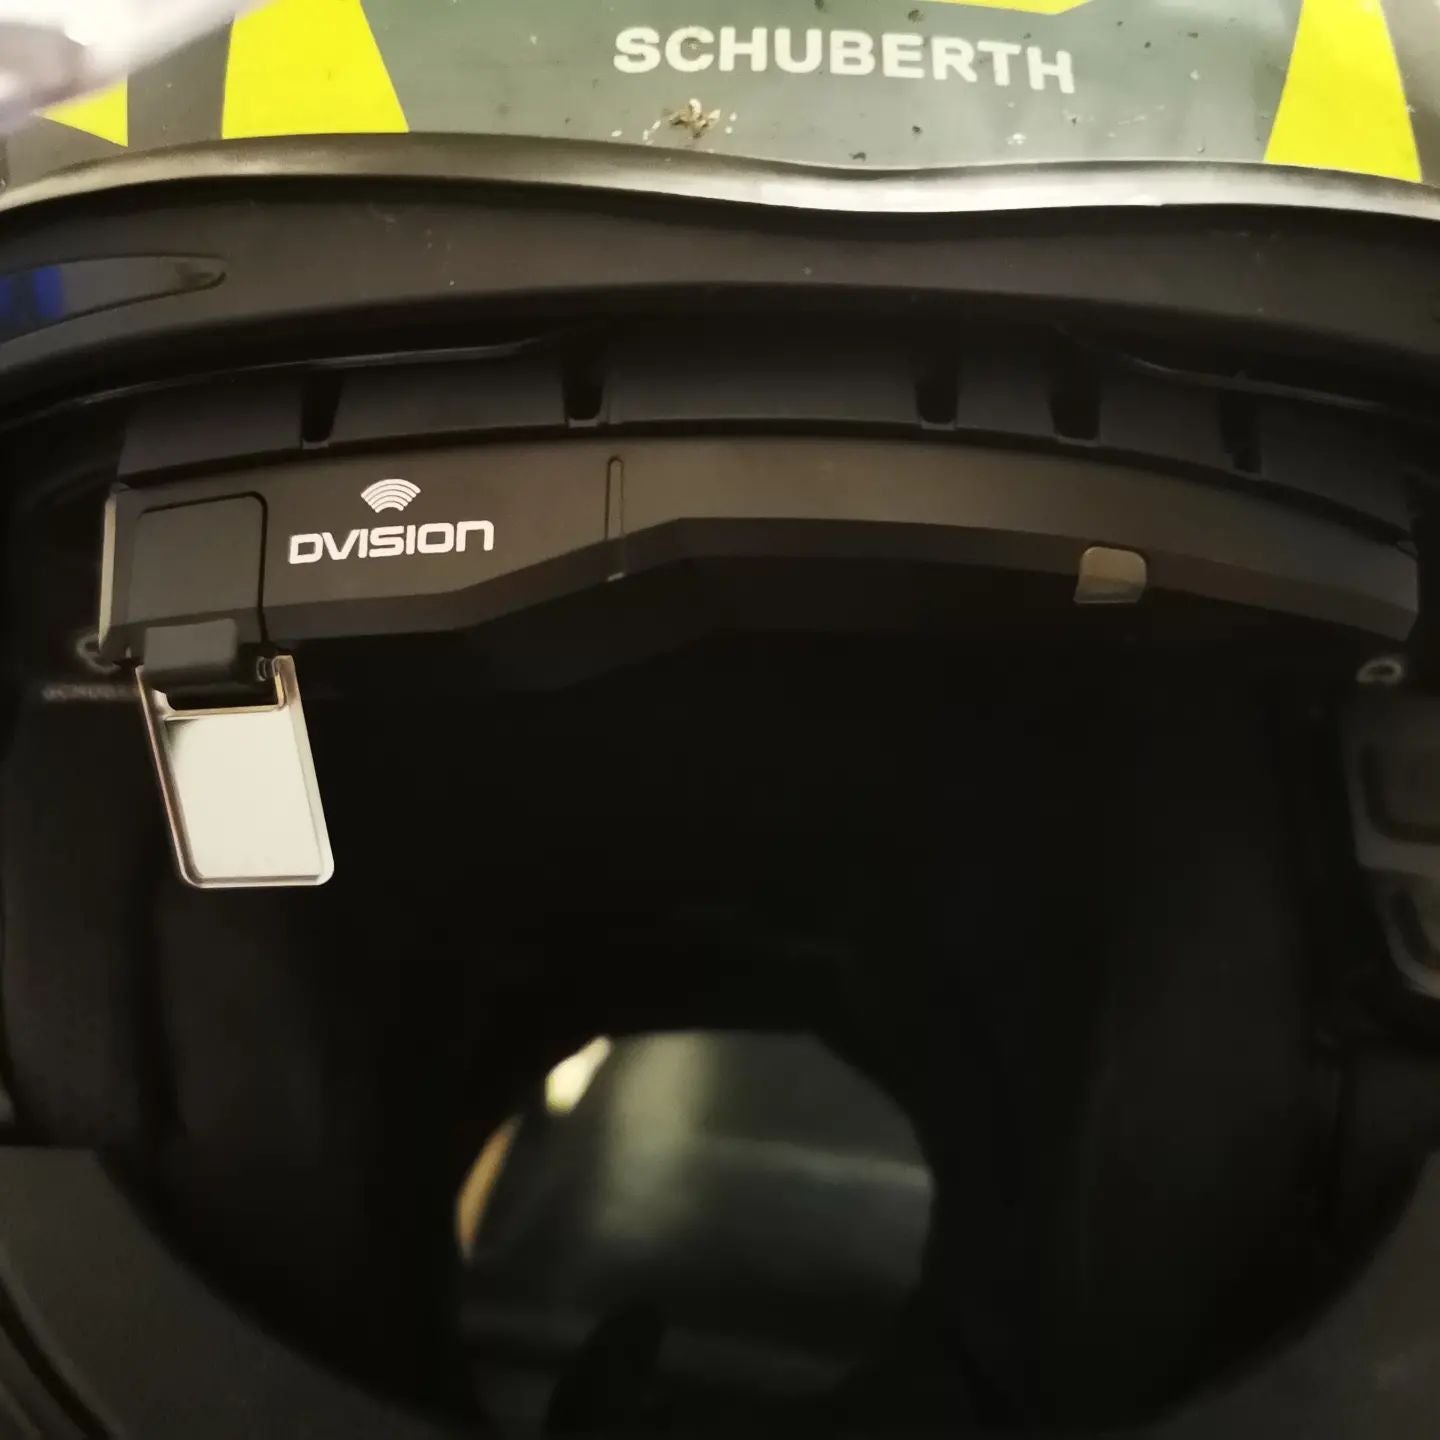 There are two different helmet adapters for the Head Up Display. On the one hand there is the flat helmet adapter and on the other hand there is the wide helmet adapter with tabs.